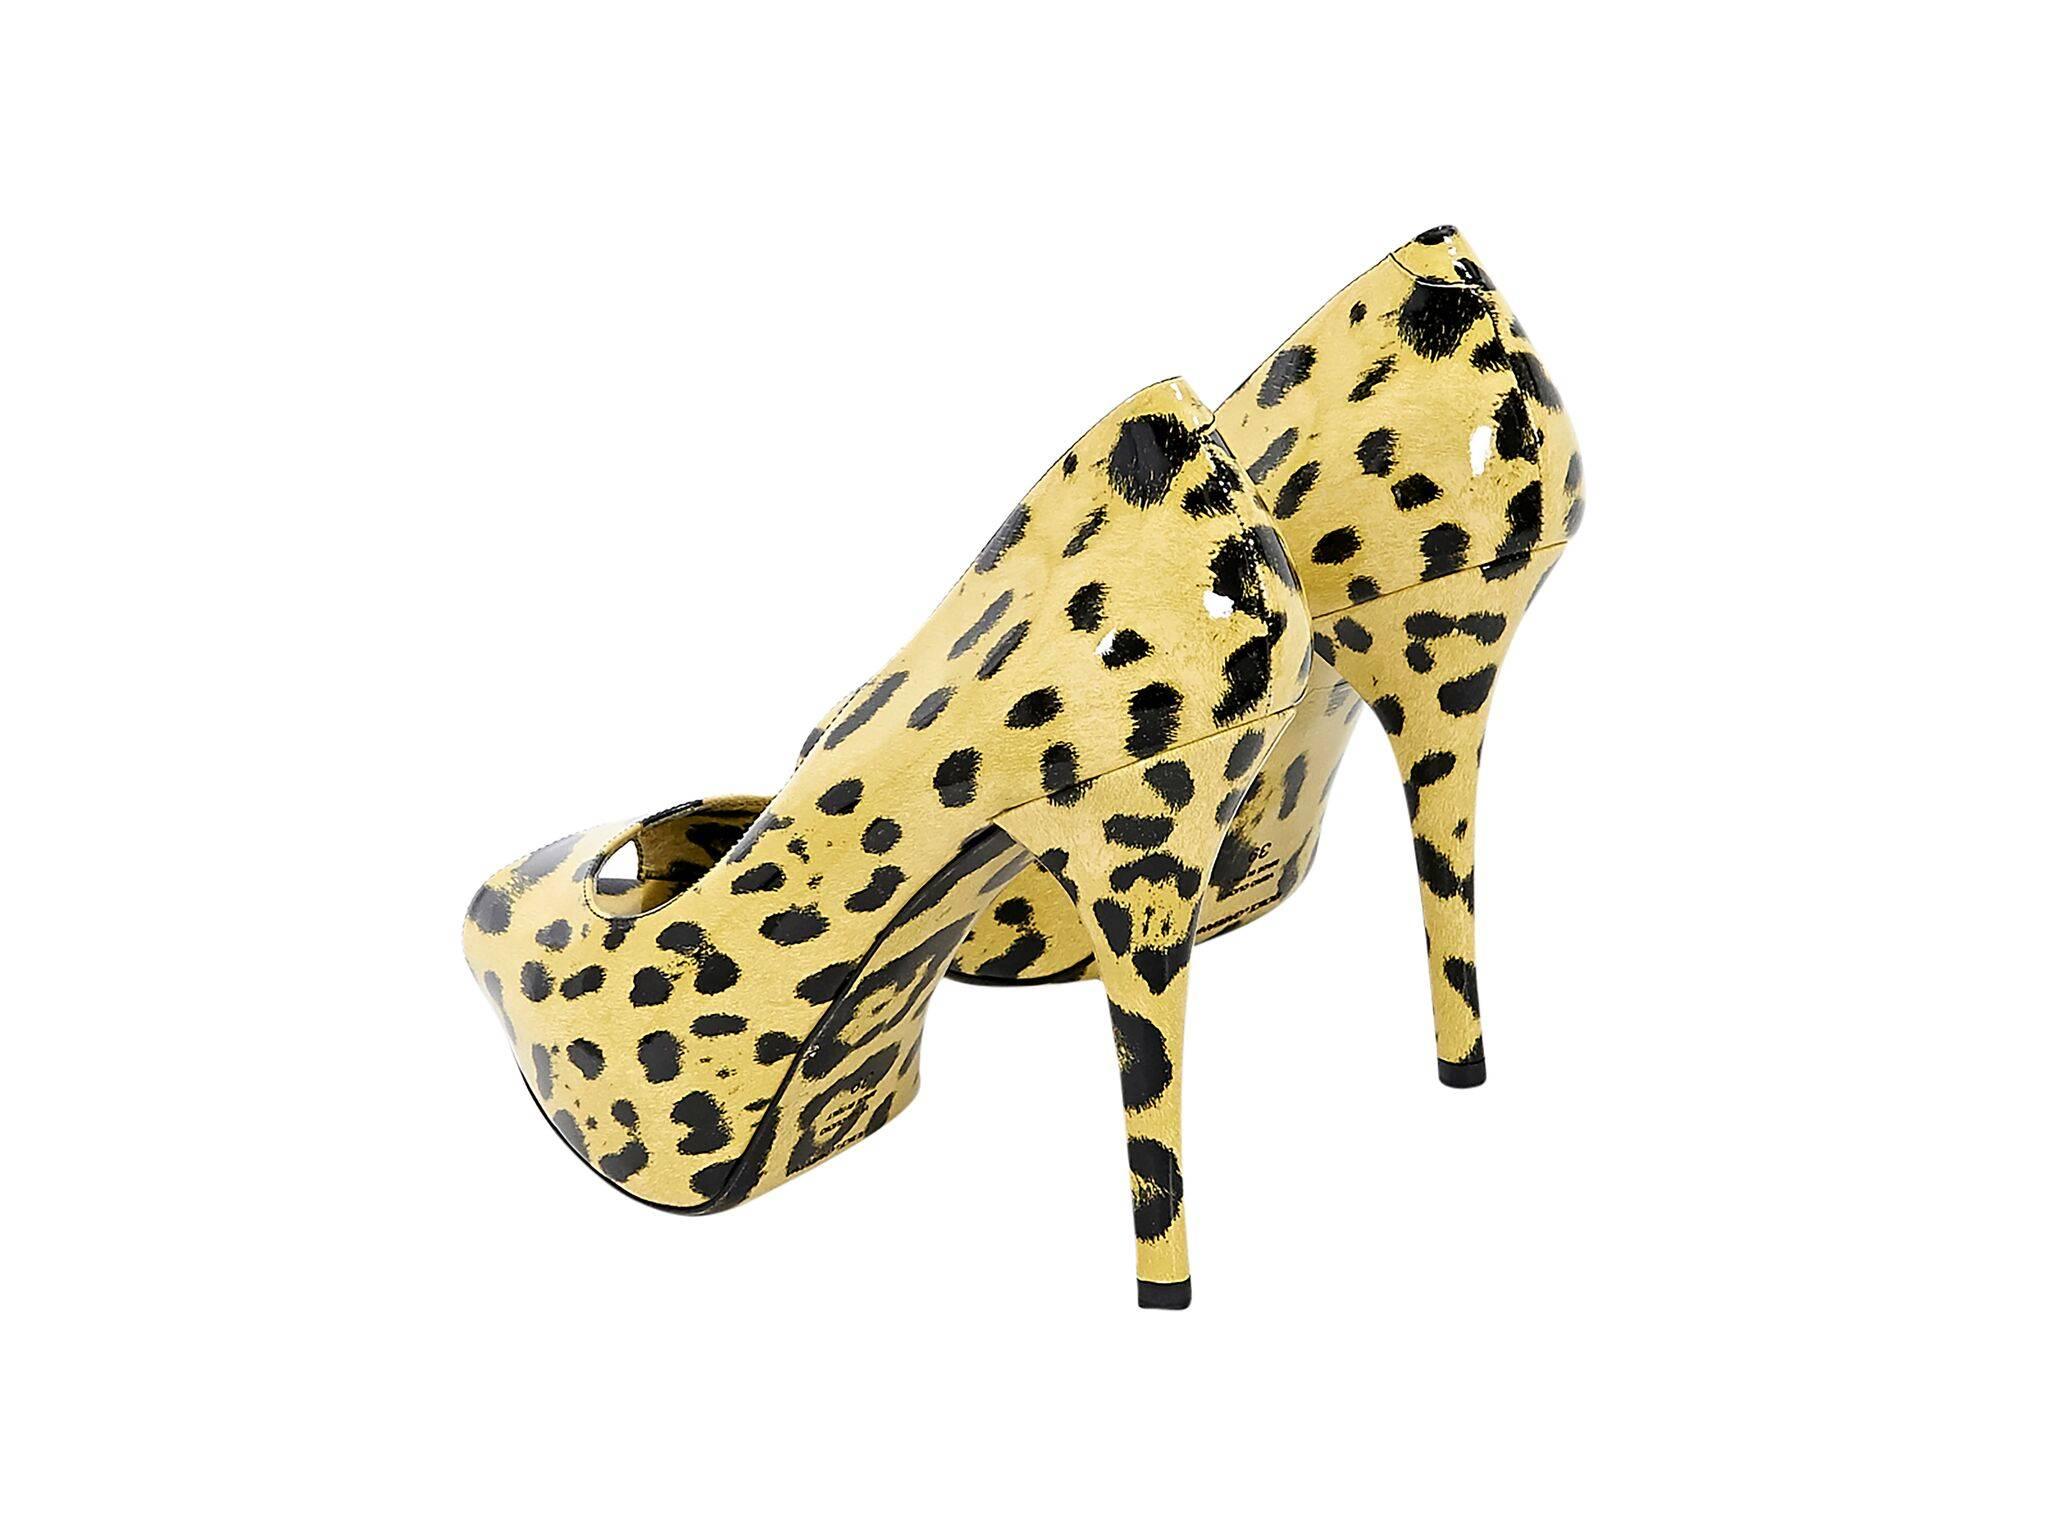 Product details:  Yellow and black leopard-print patent leather pumps by Dolce & Gabbana.  Peep toe.  Platform design.  Slip-on style. 
Condition: Pre-owned. Very good.
Est. Retail $598